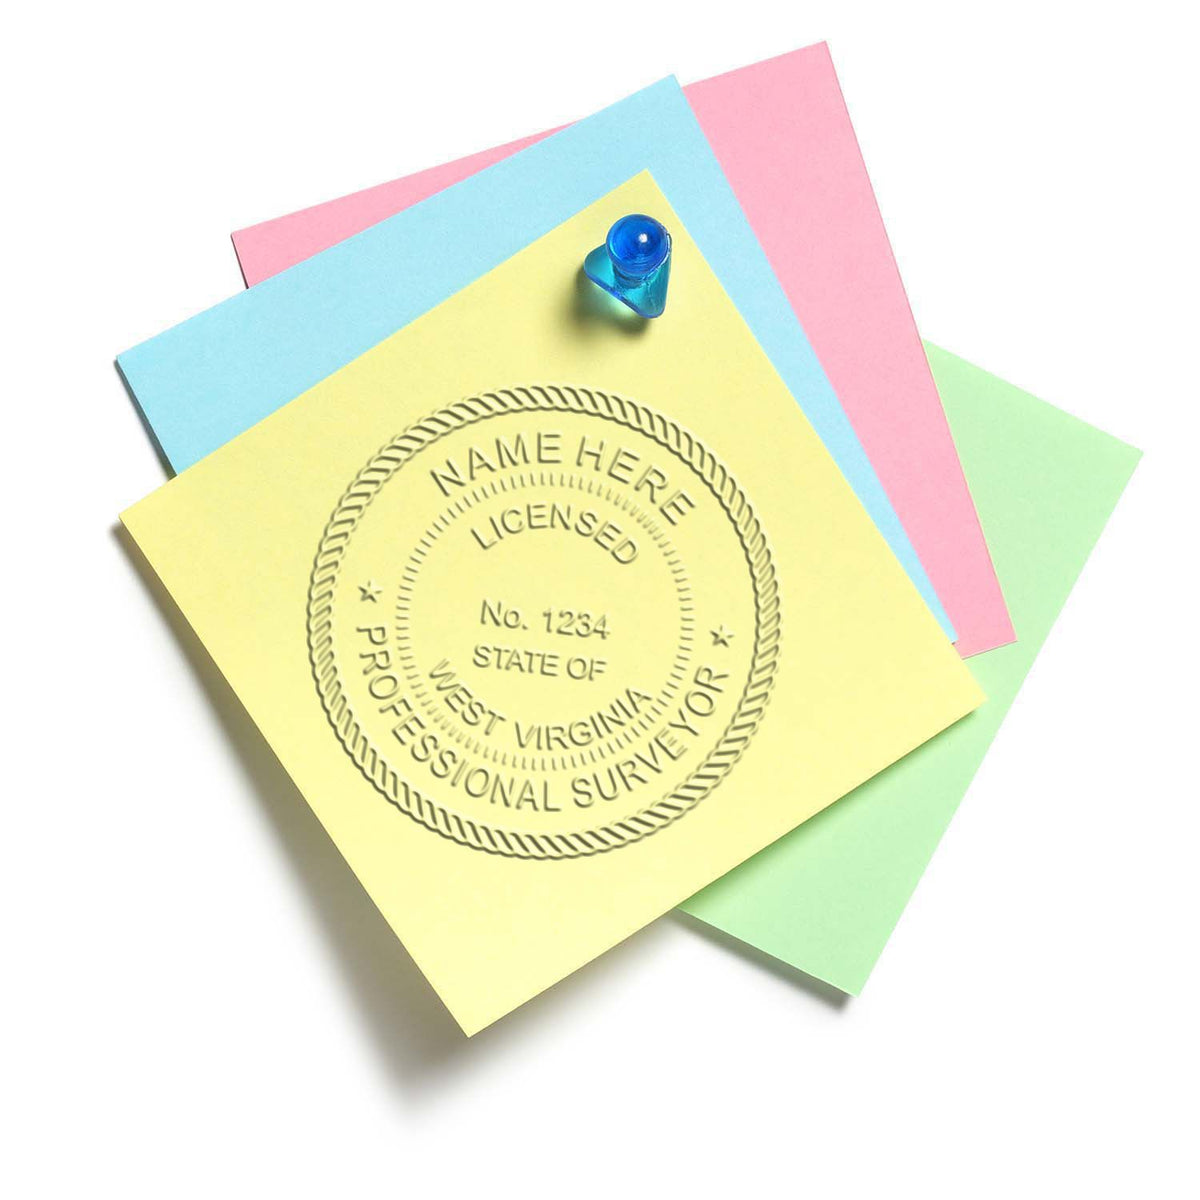 An alternative view of the Hybrid West Virginia Land Surveyor Seal stamped on a sheet of paper showing the image in use